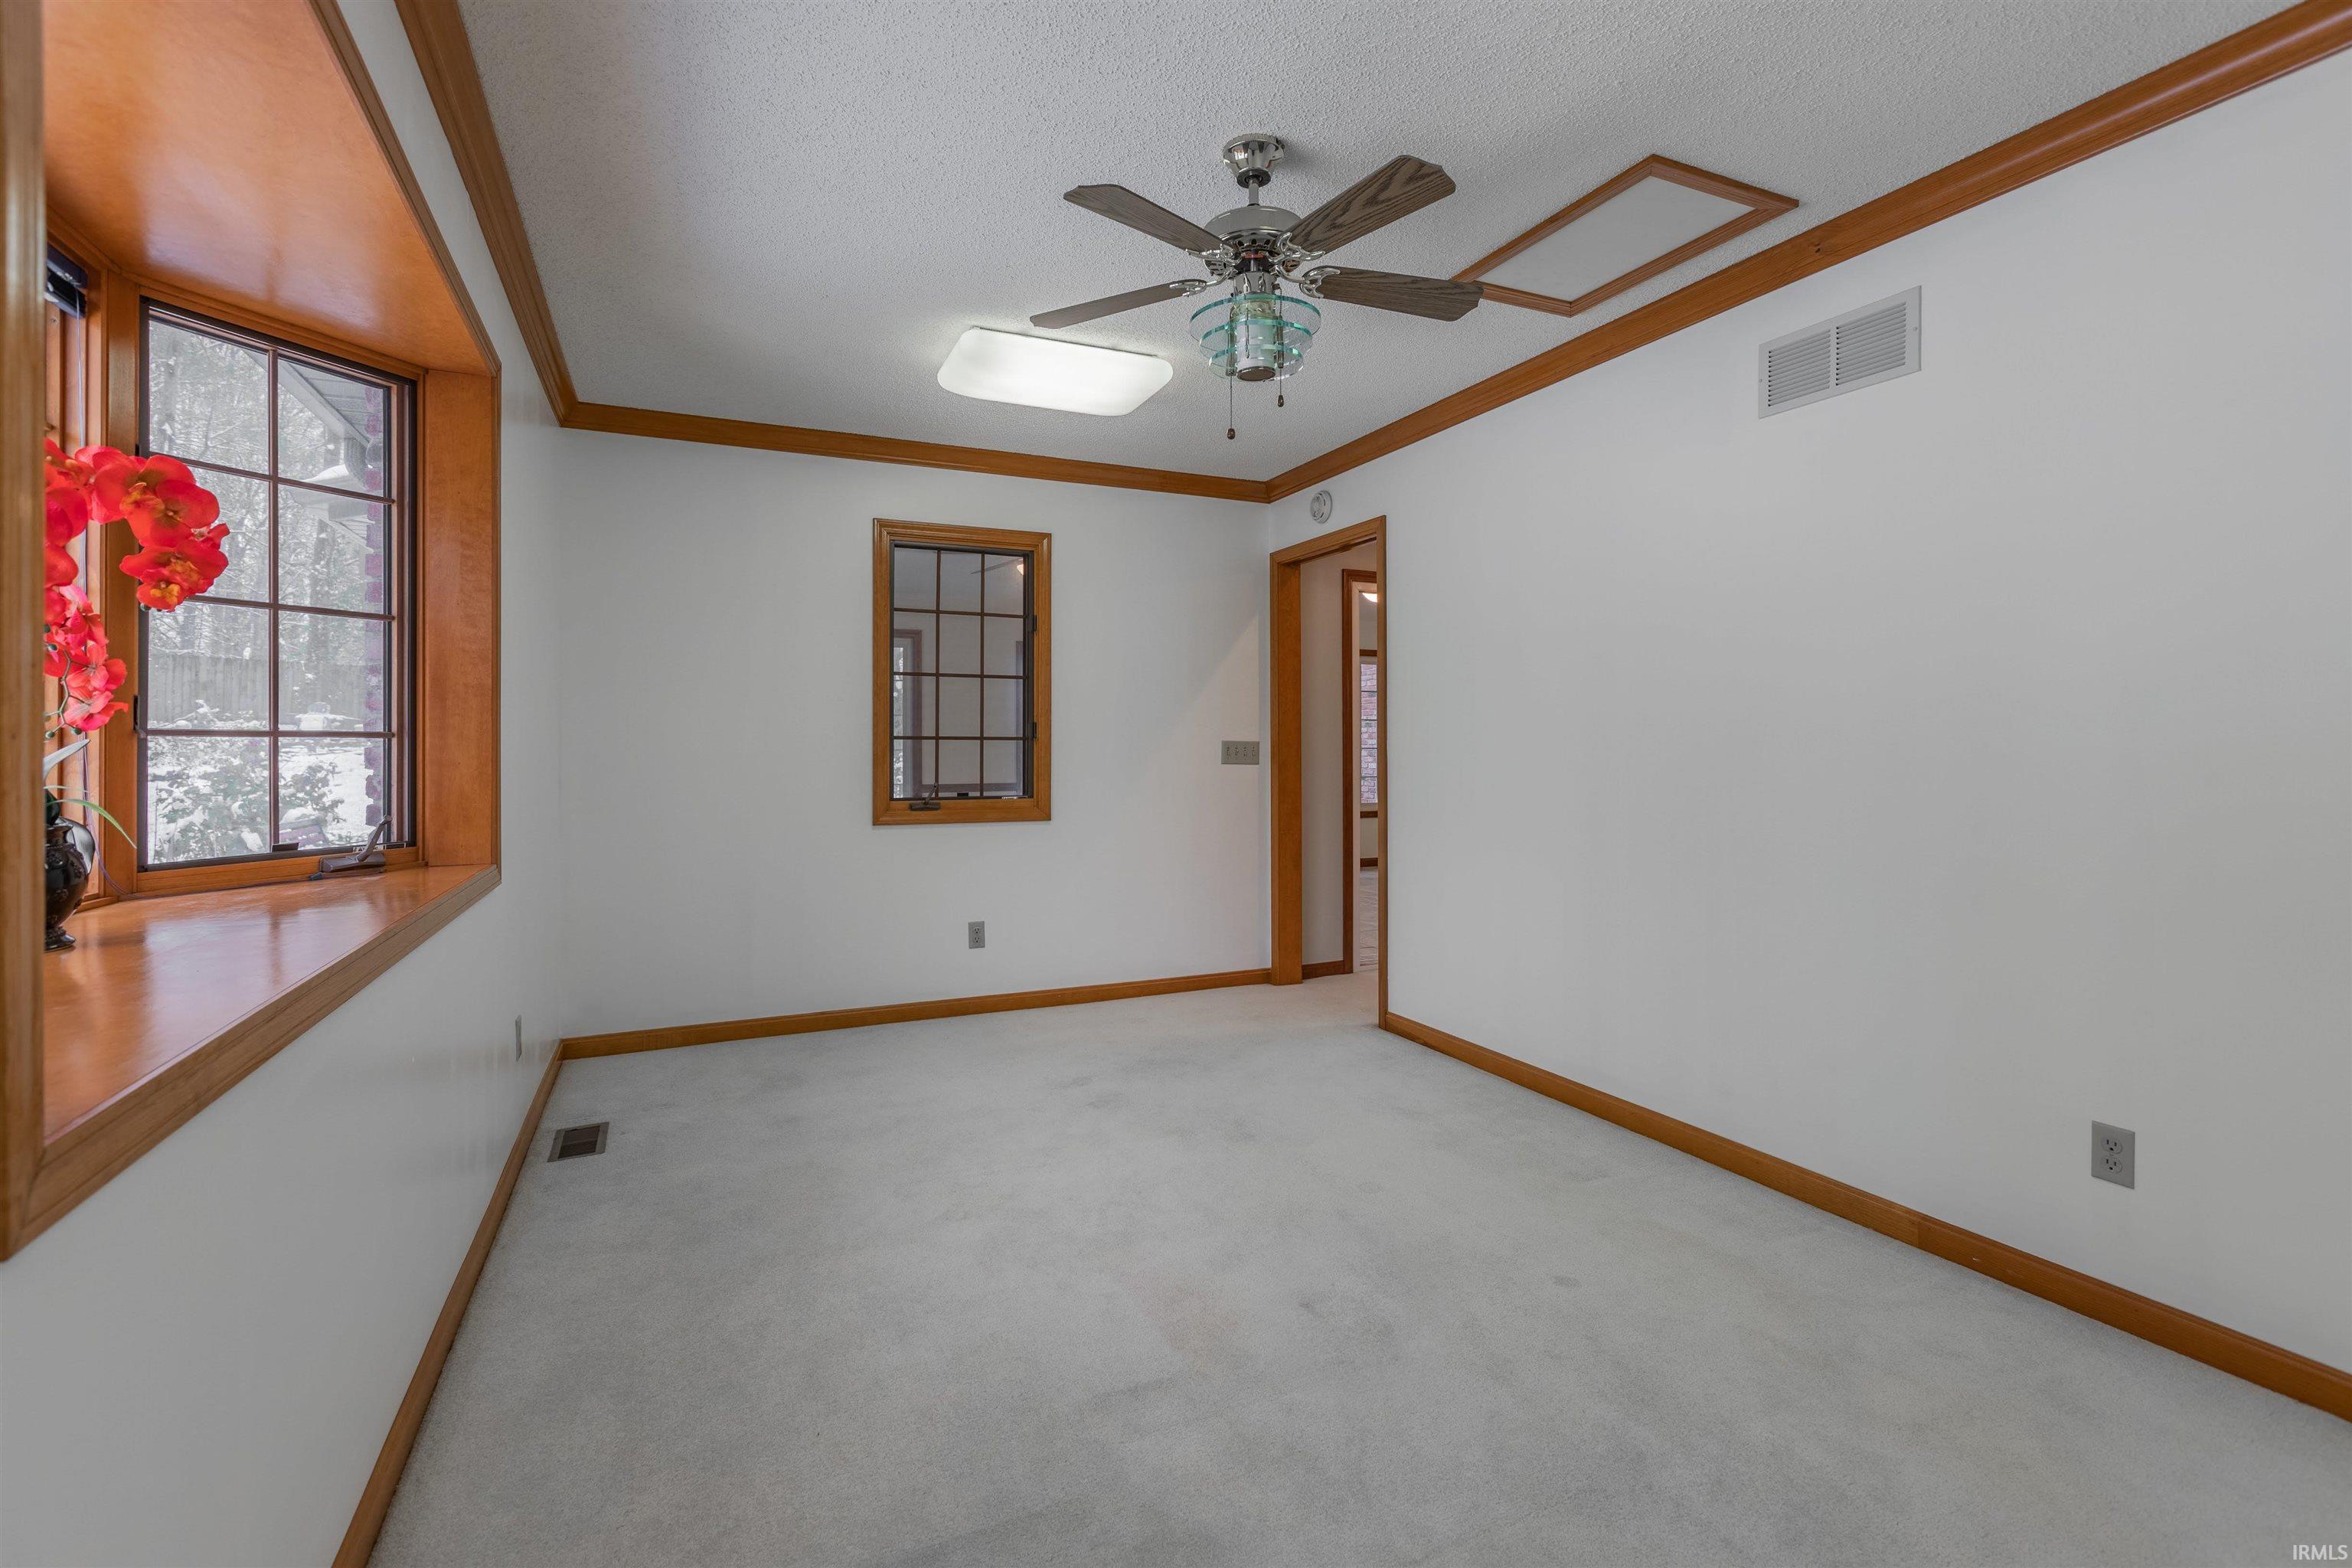 ...with Ceiling Fan, Floor Outlets, Bay Window and view into All-Weather Room